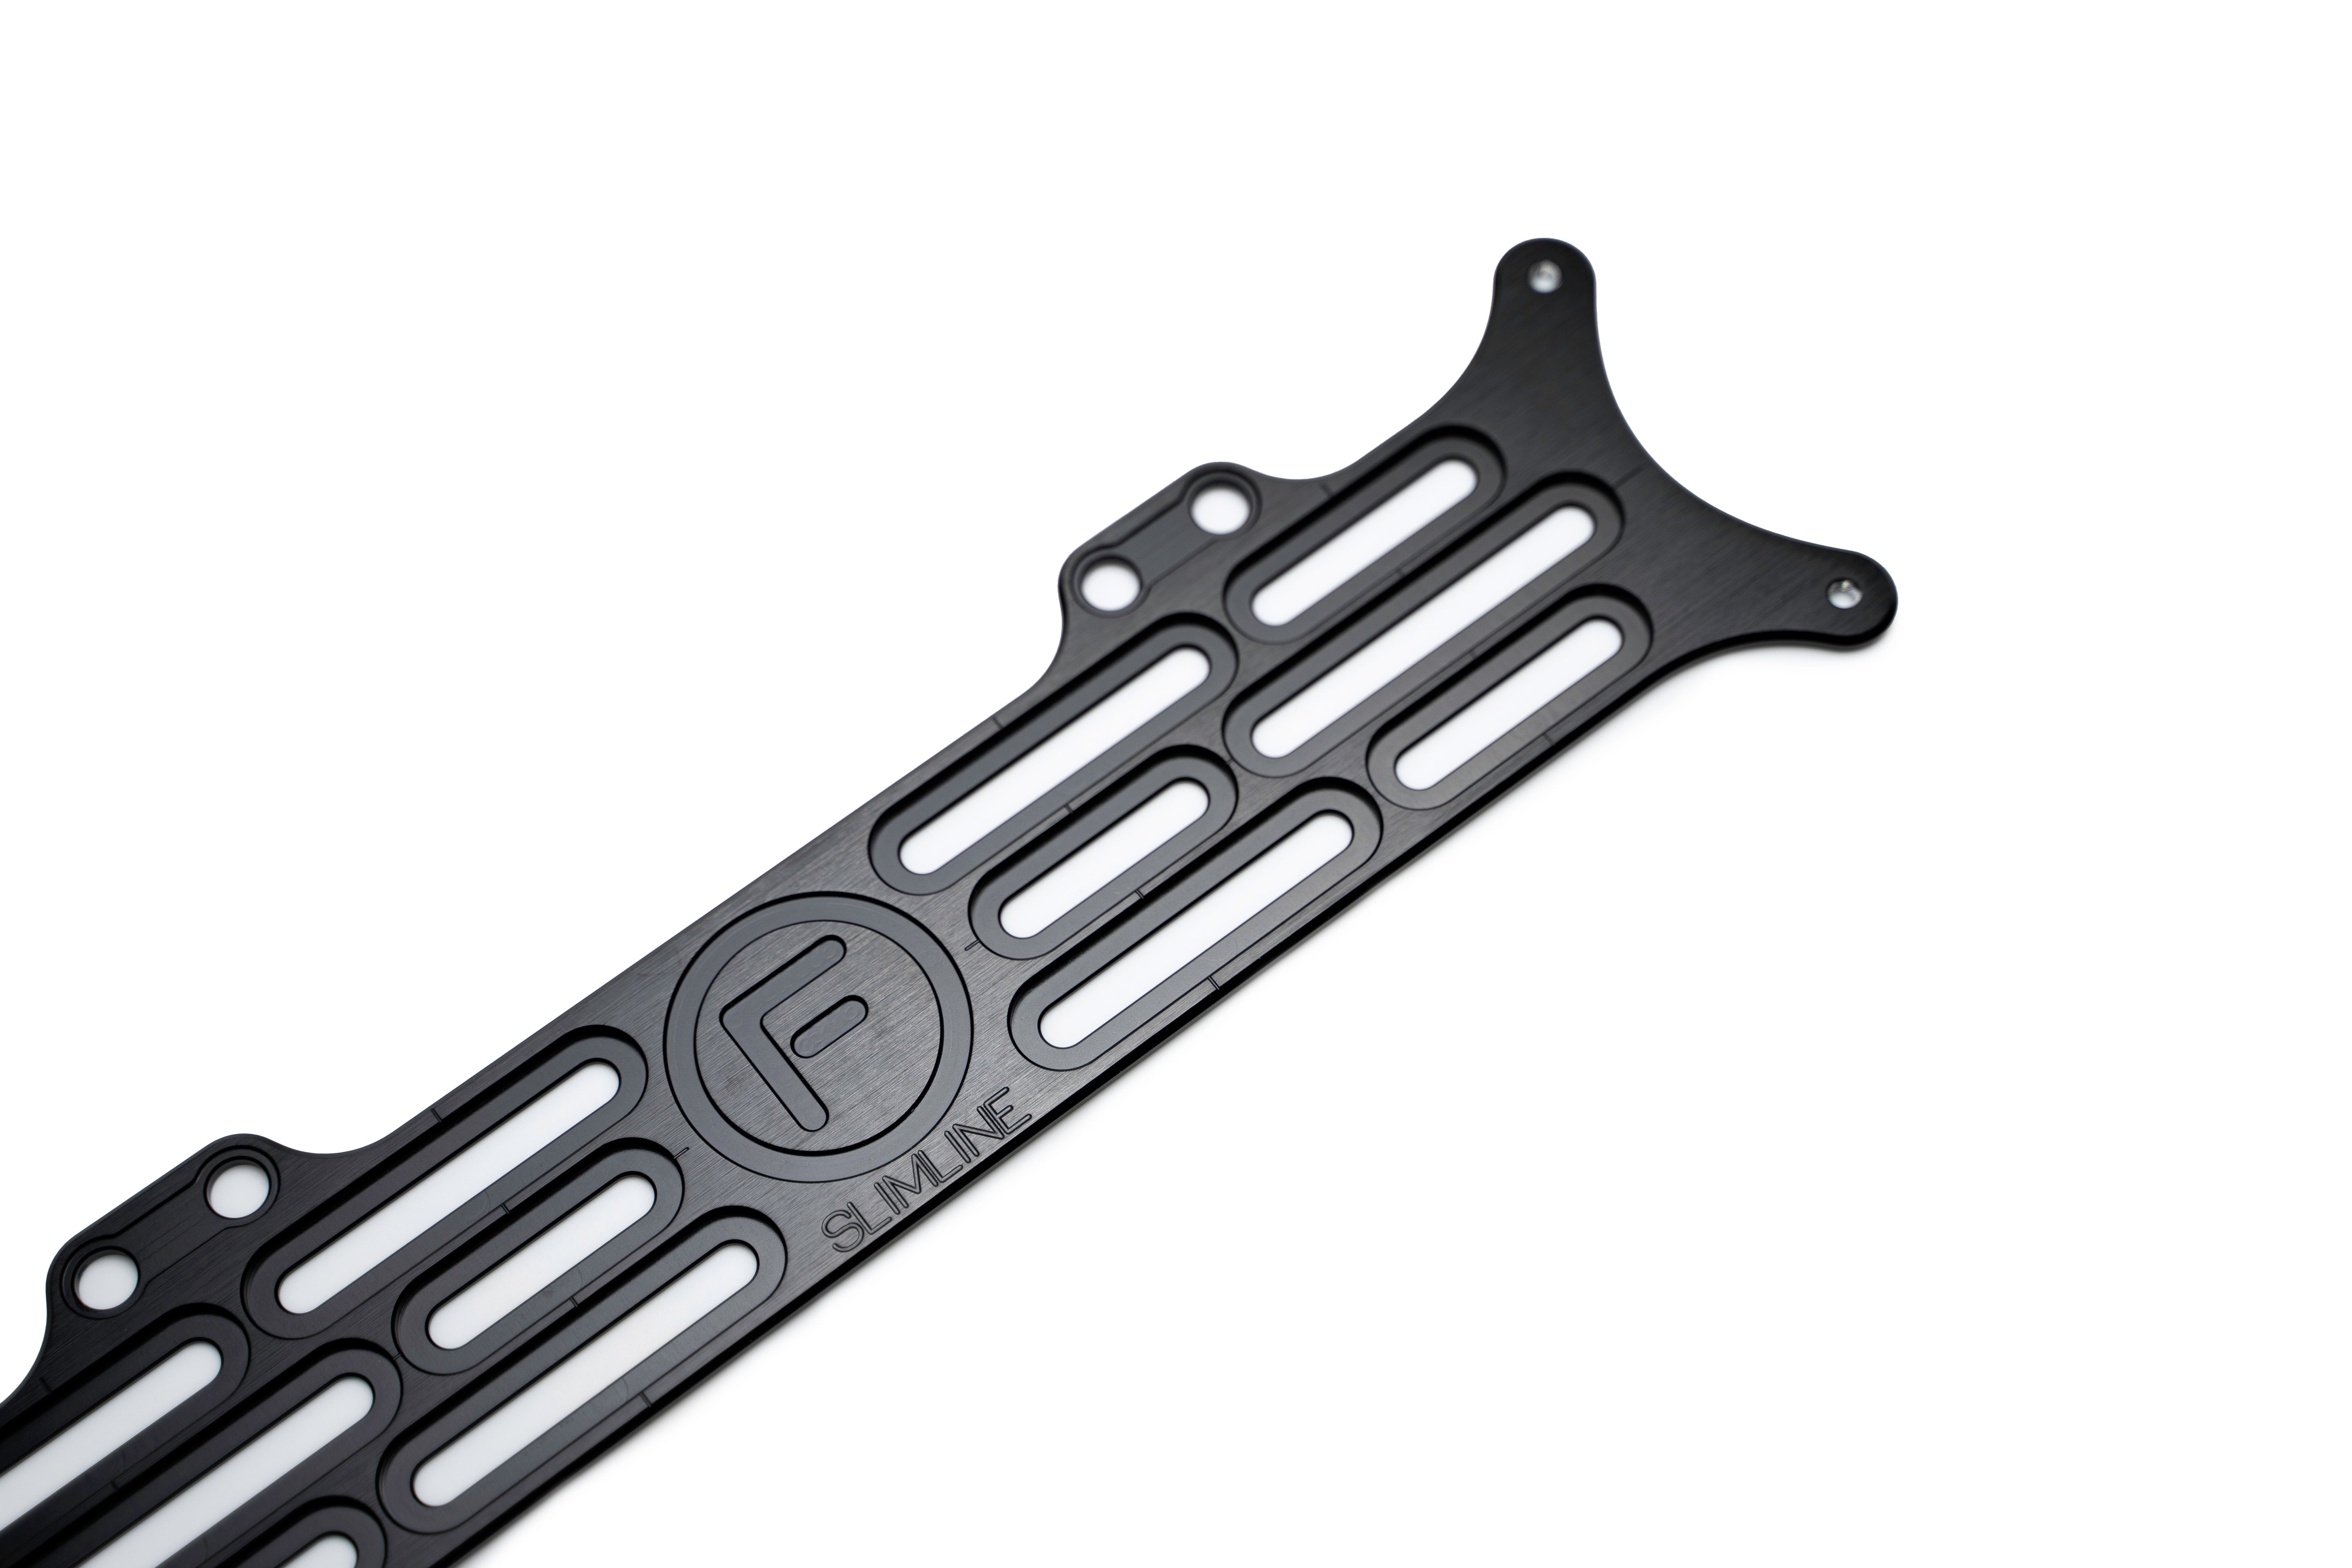 [ACT] Slimline 6-7 Character (Long Plate) - Number Plate Bracket